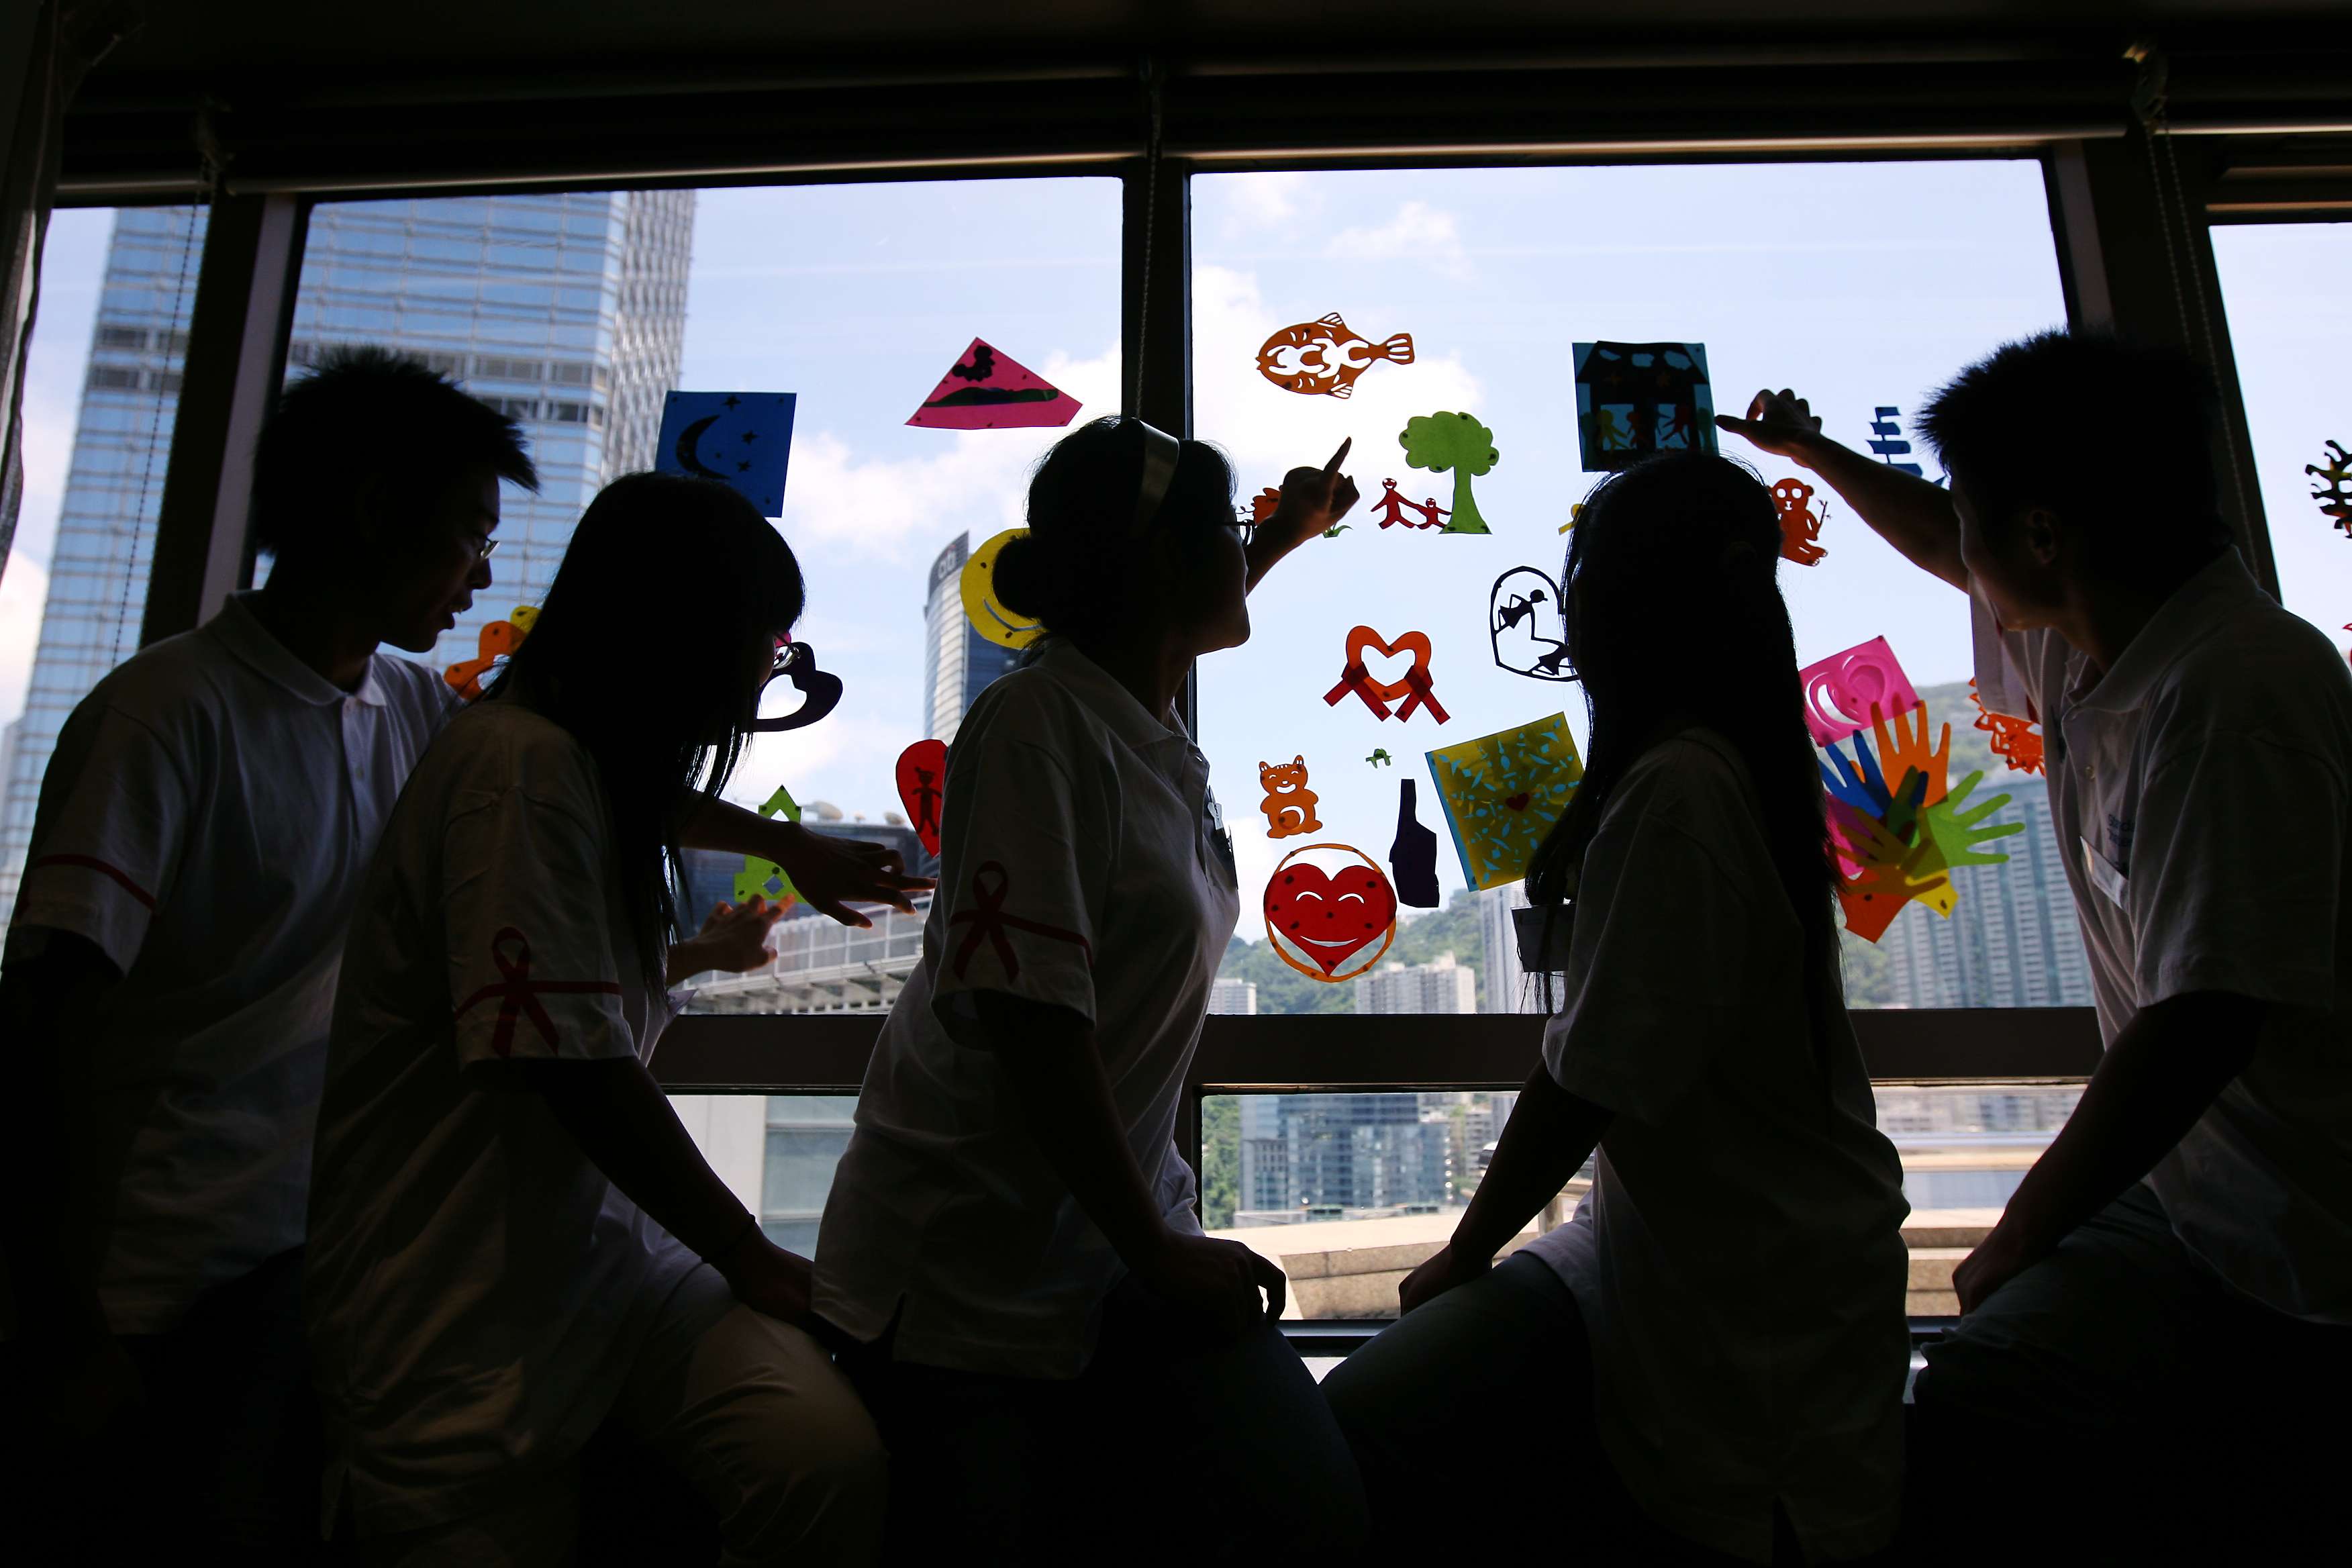 It can be a lonely life for children living in social welfare homes. Photo: K. Y. Cheng